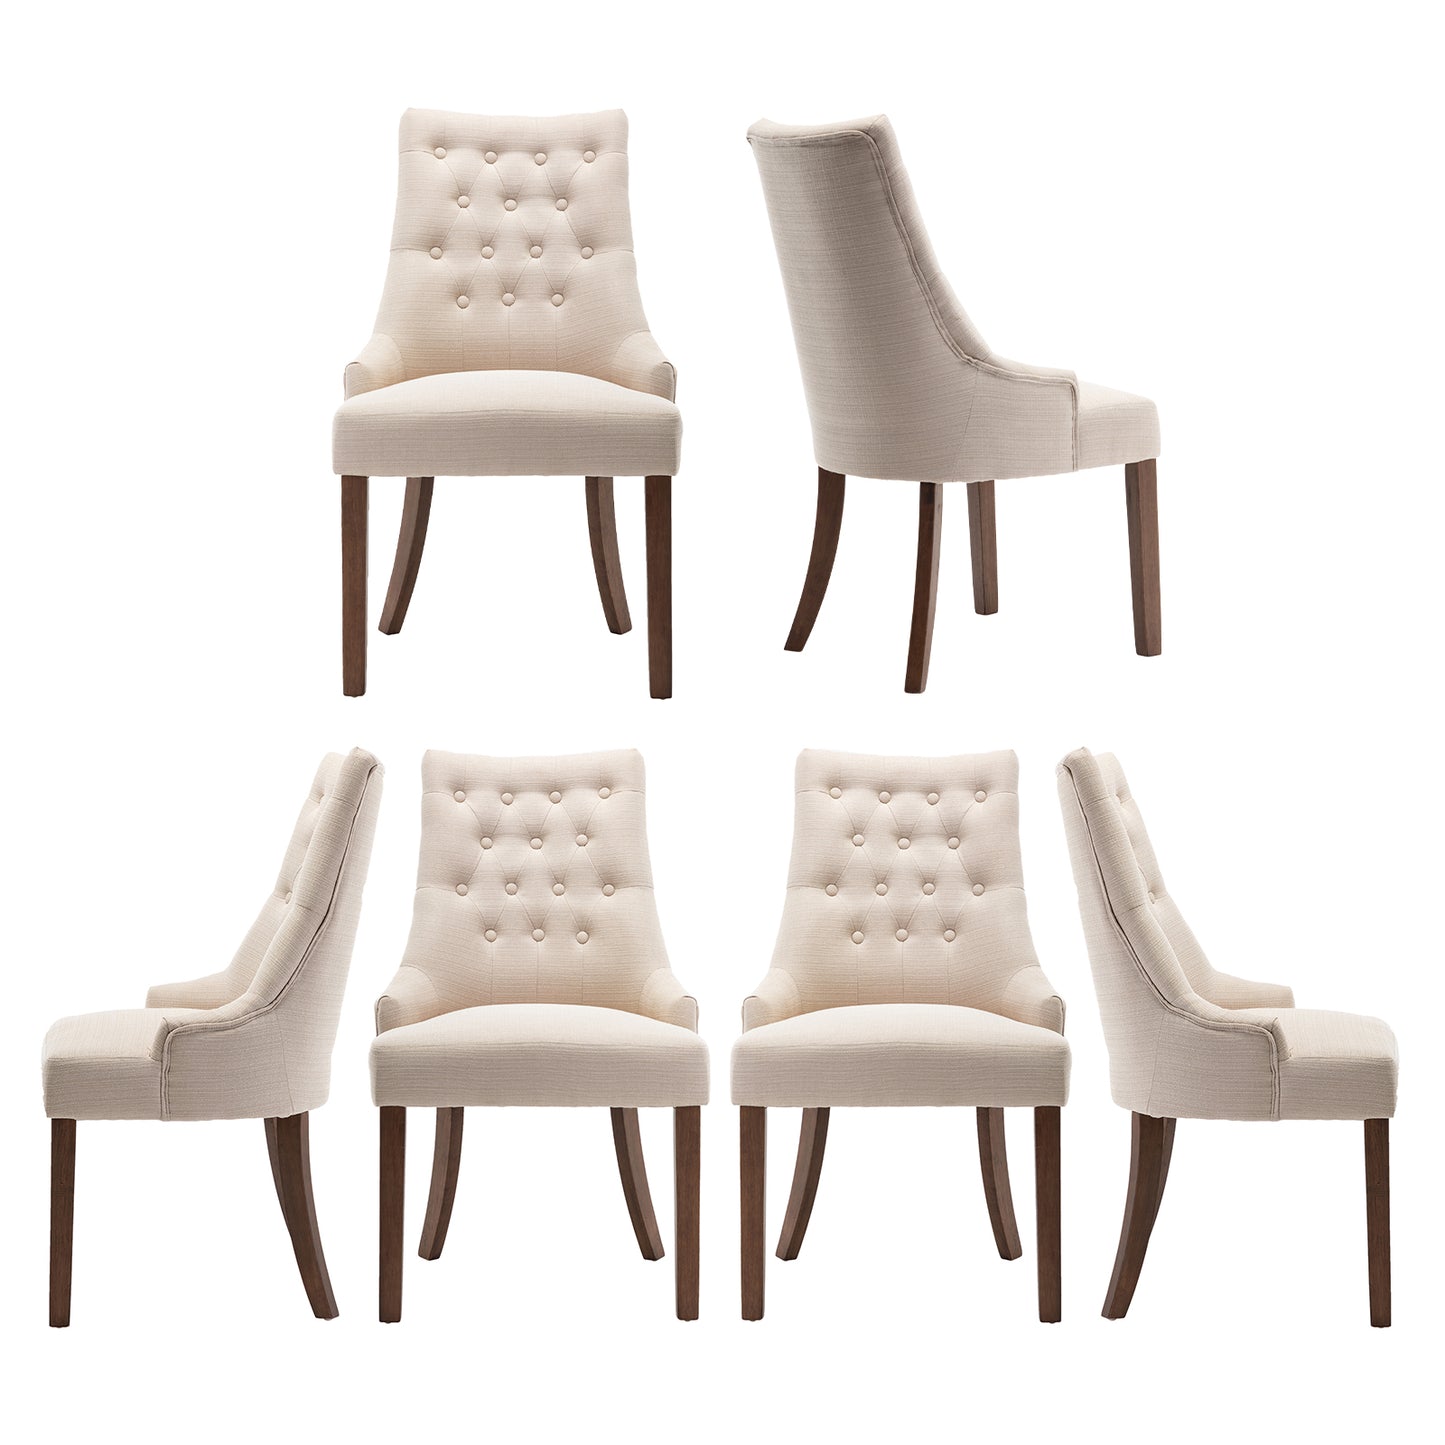 COLAMY Tufted Upholstered Dining Chair Beige Color Wingback Kitchen Chair